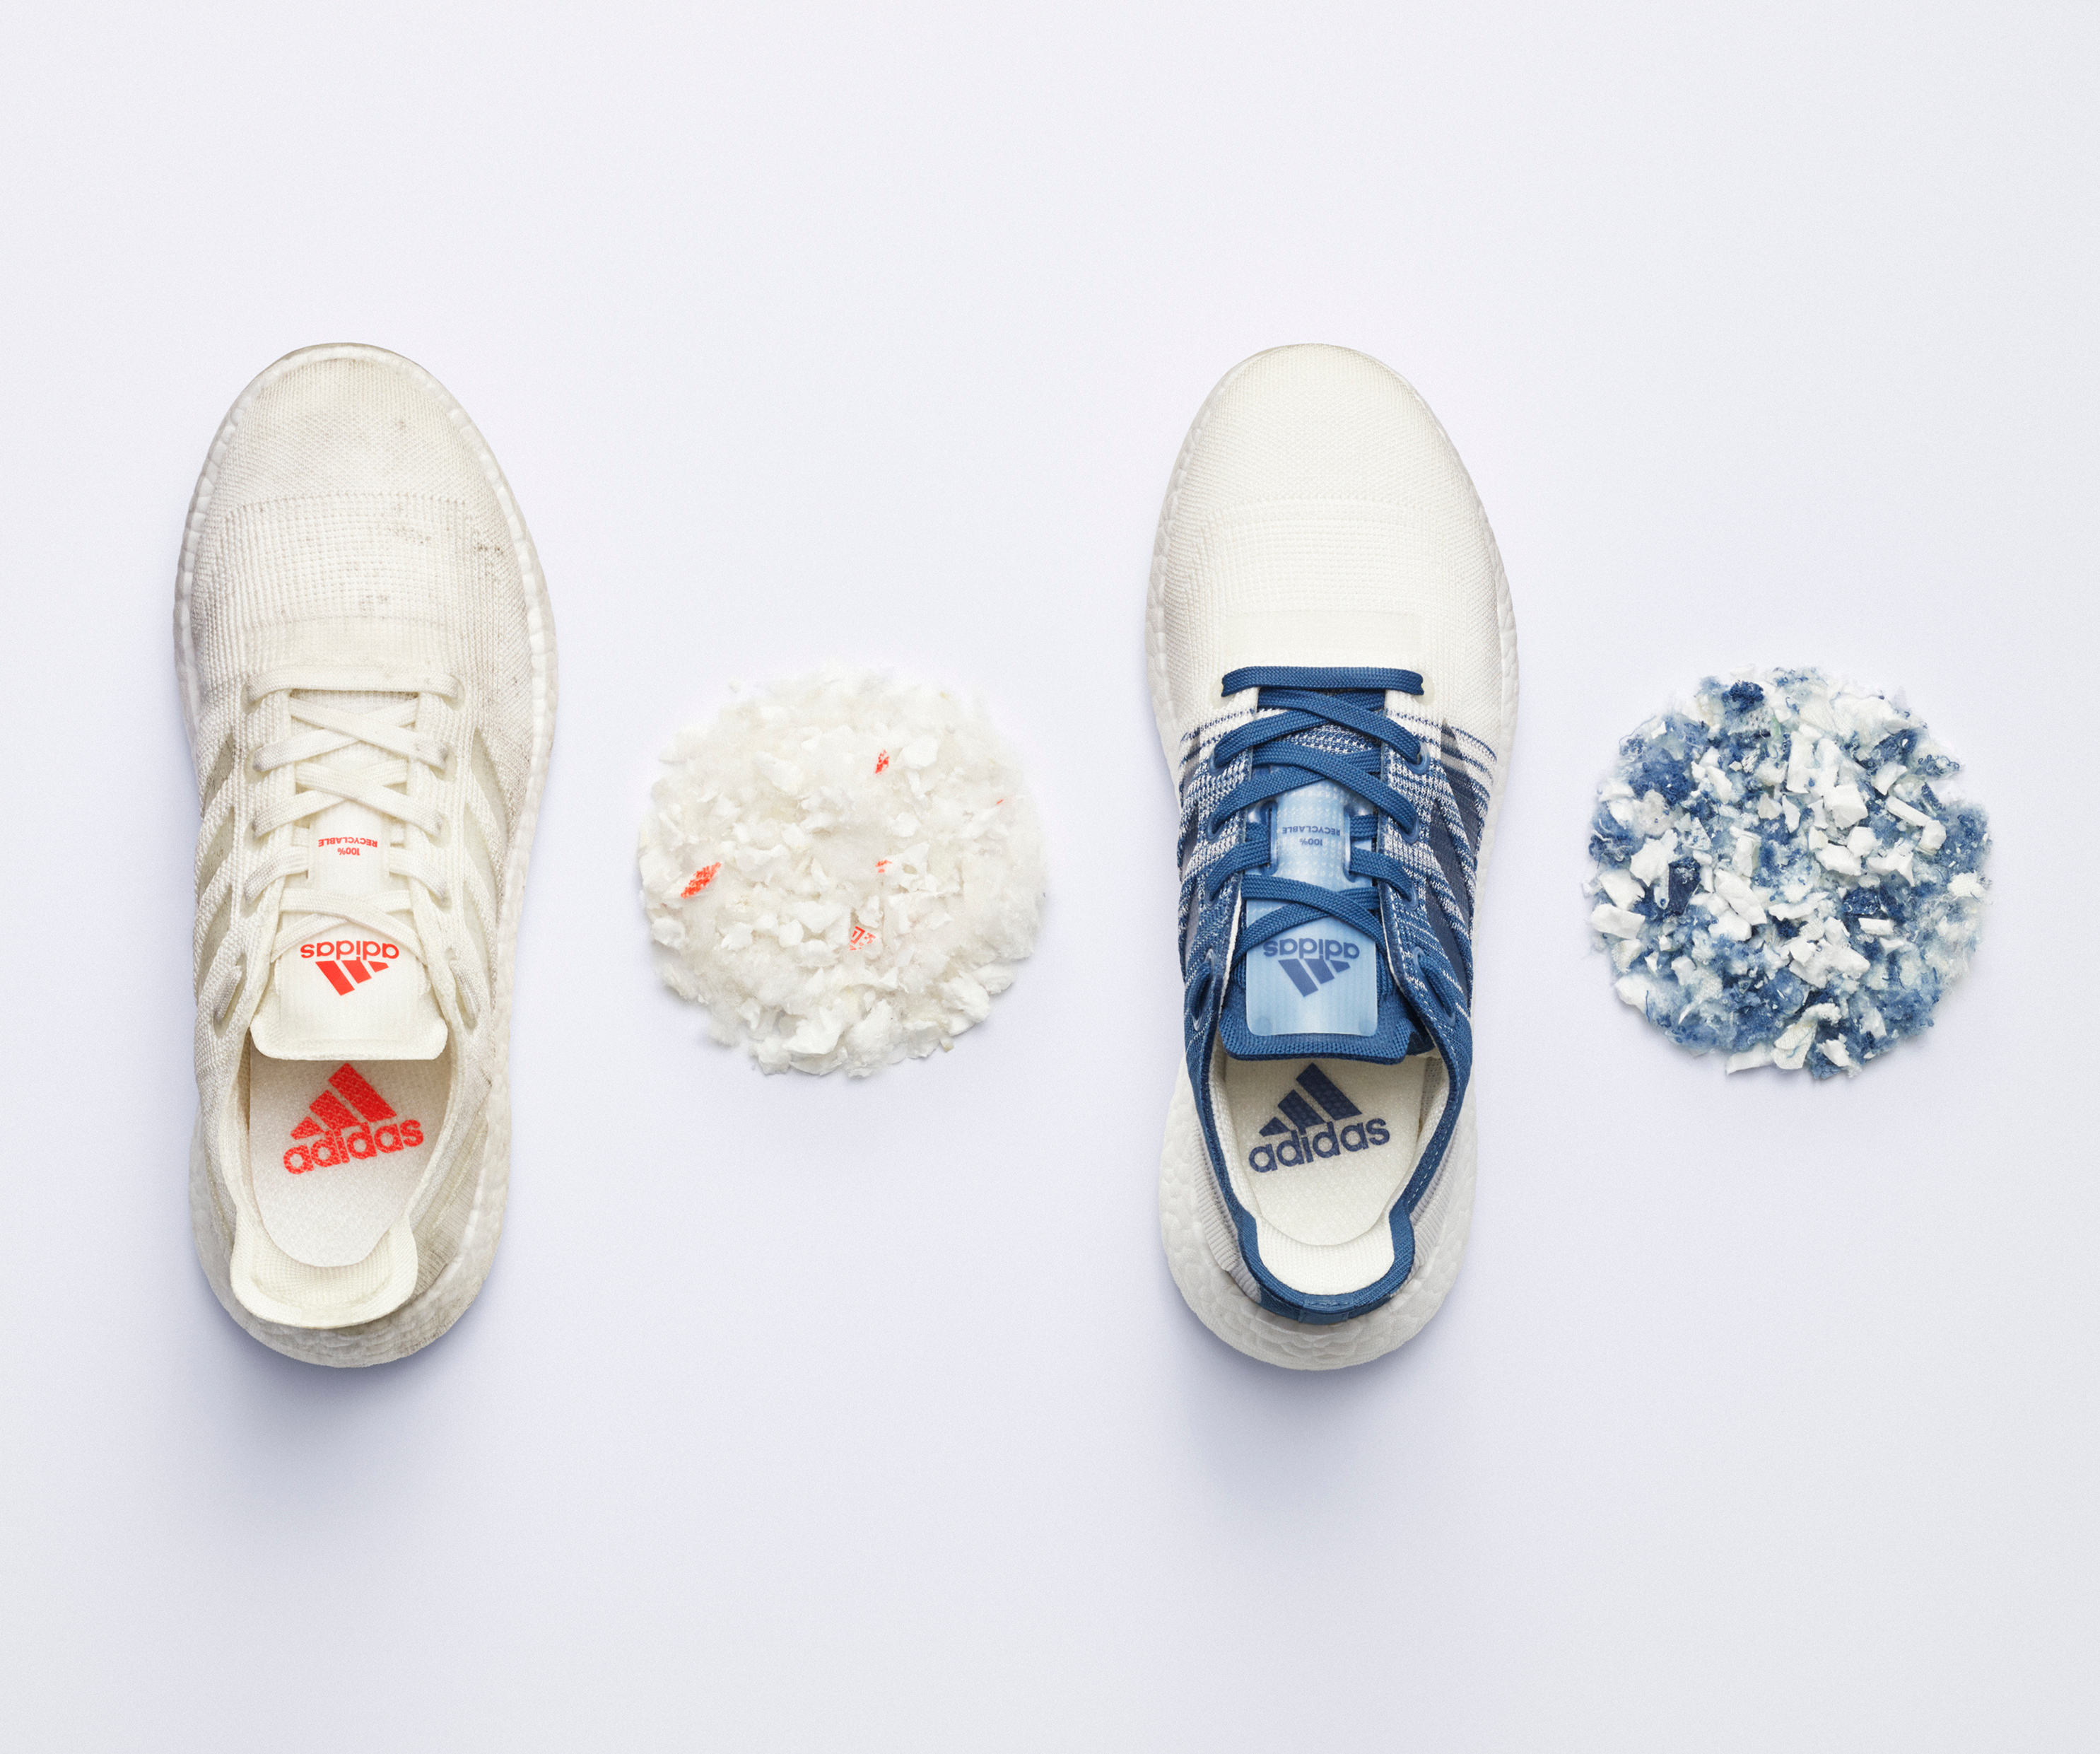 Adidas Increasing Usage of Recycled in its Products | Plastics Technology